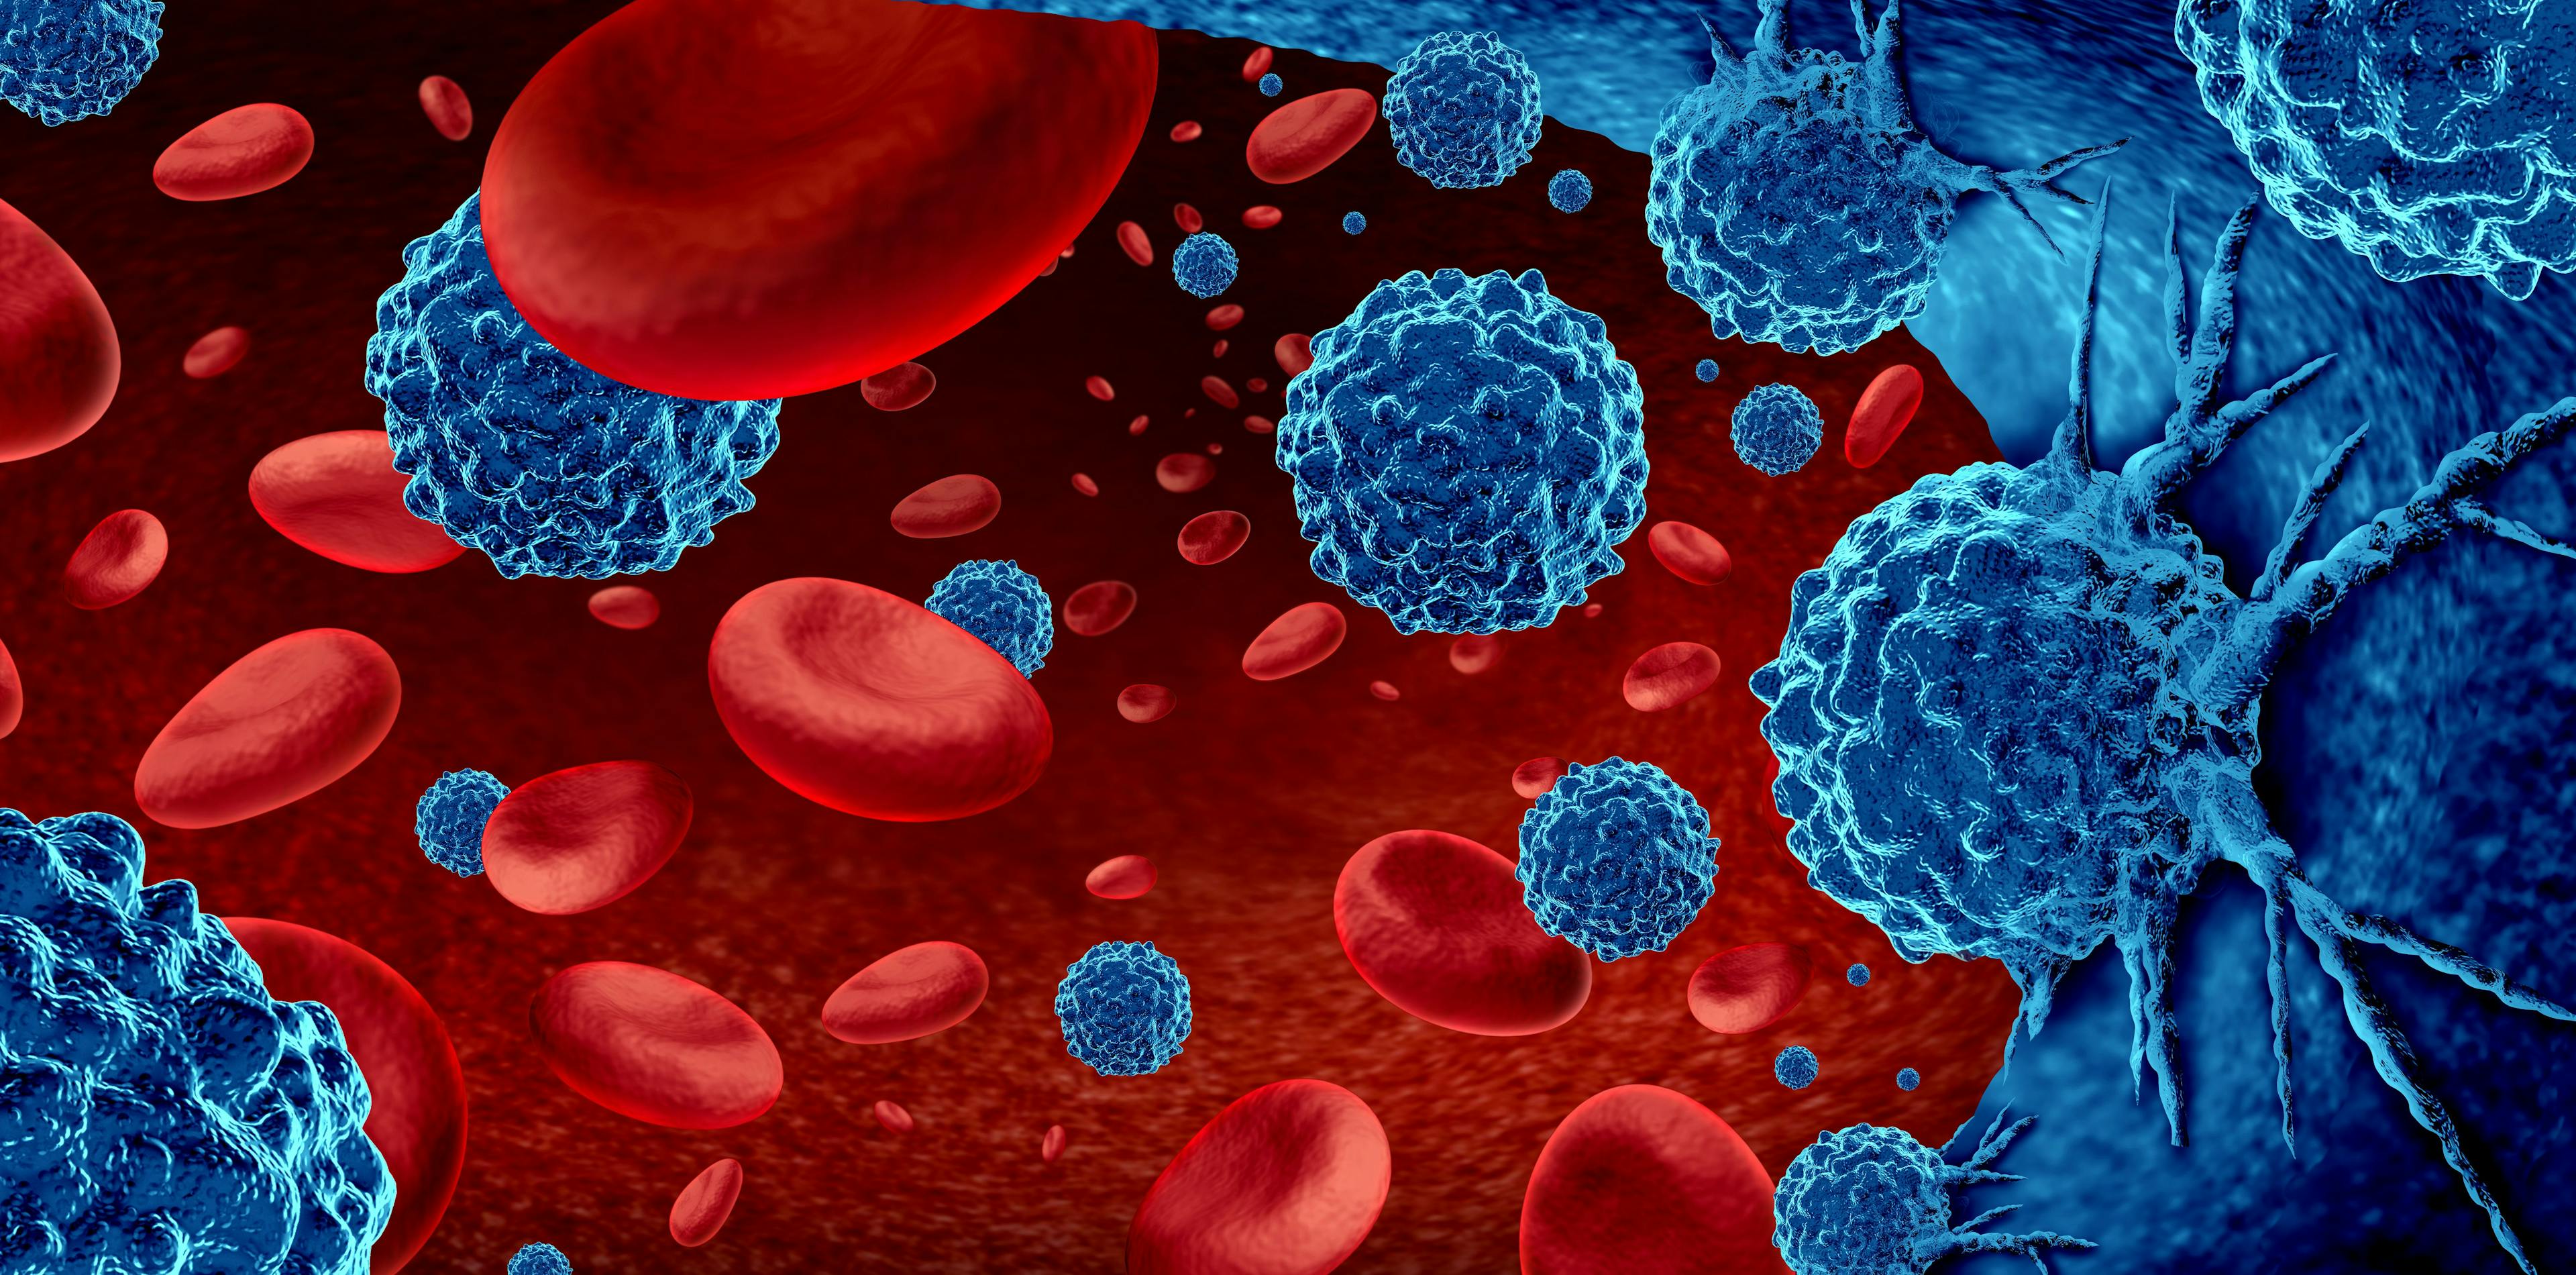 Cancer in the blood outbreak and treatment for malignant cells in a human body caused by carcinogens and genetics with a cancerous cell as an immunotherapy and leukemia or lymphoma symbol and medical | Image Credit: freshidea - stock.adobe.com